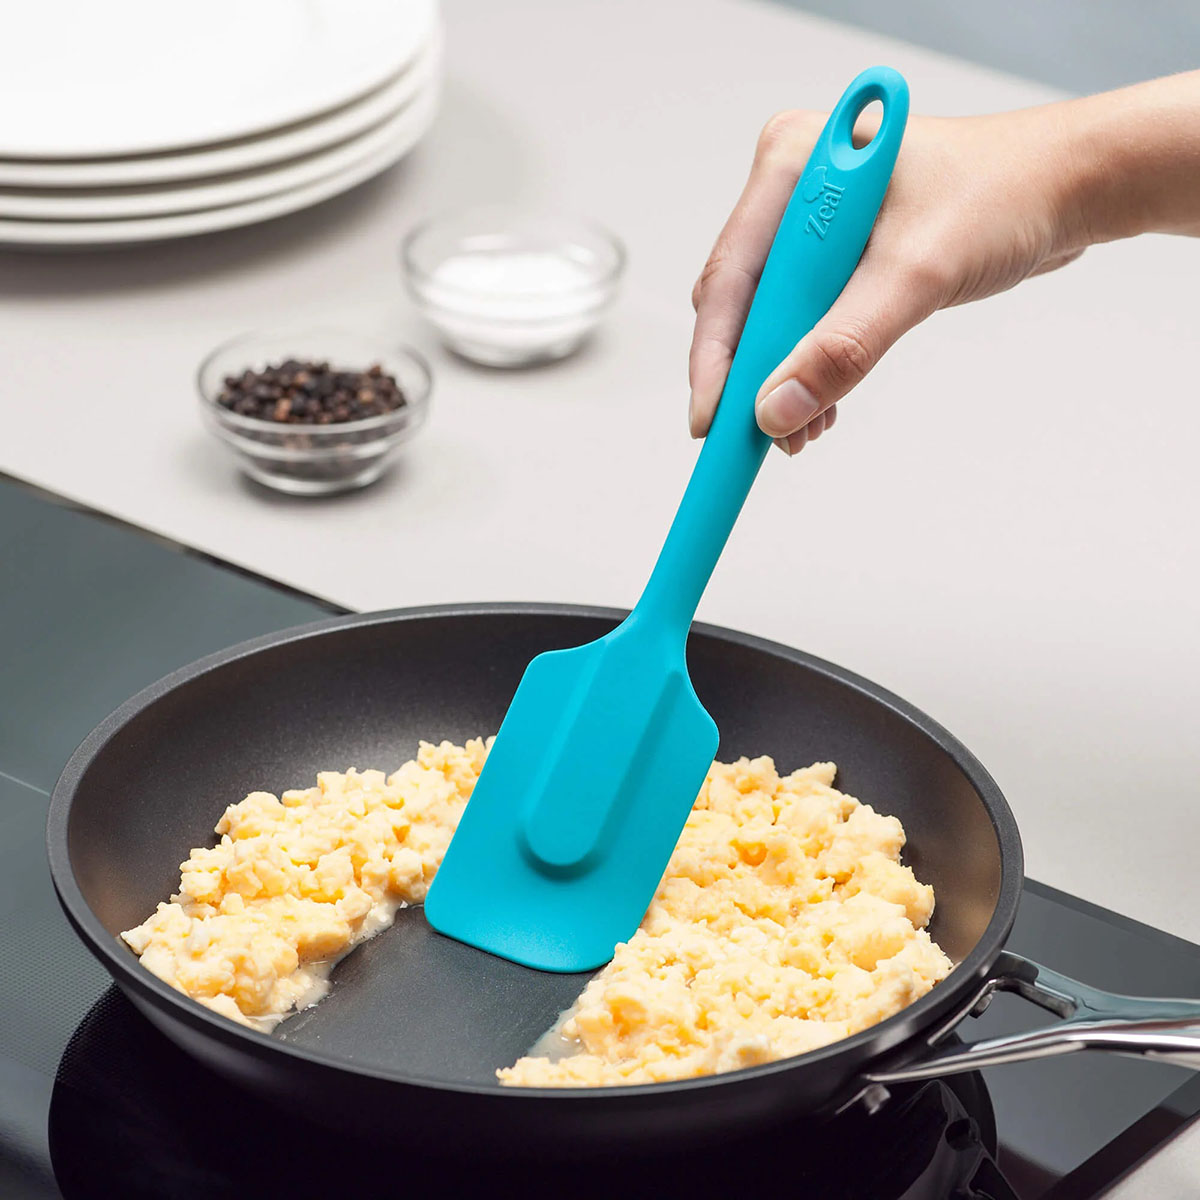 What Is A Silicone Spatula Used For